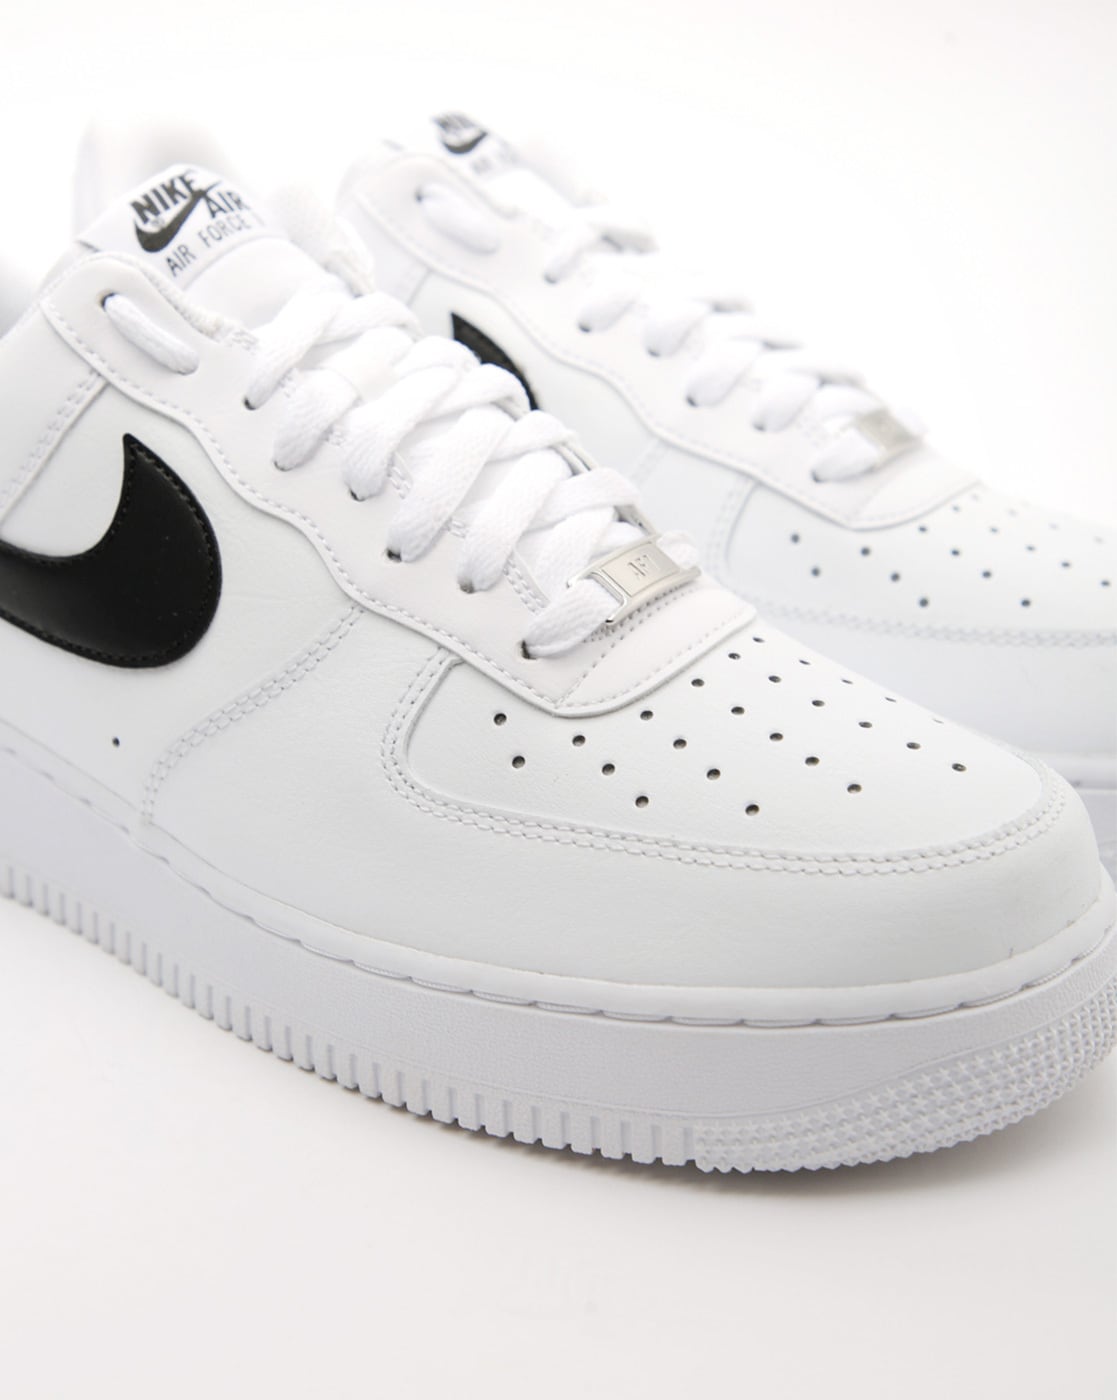 Nike Men's Air Force 1 Shoes